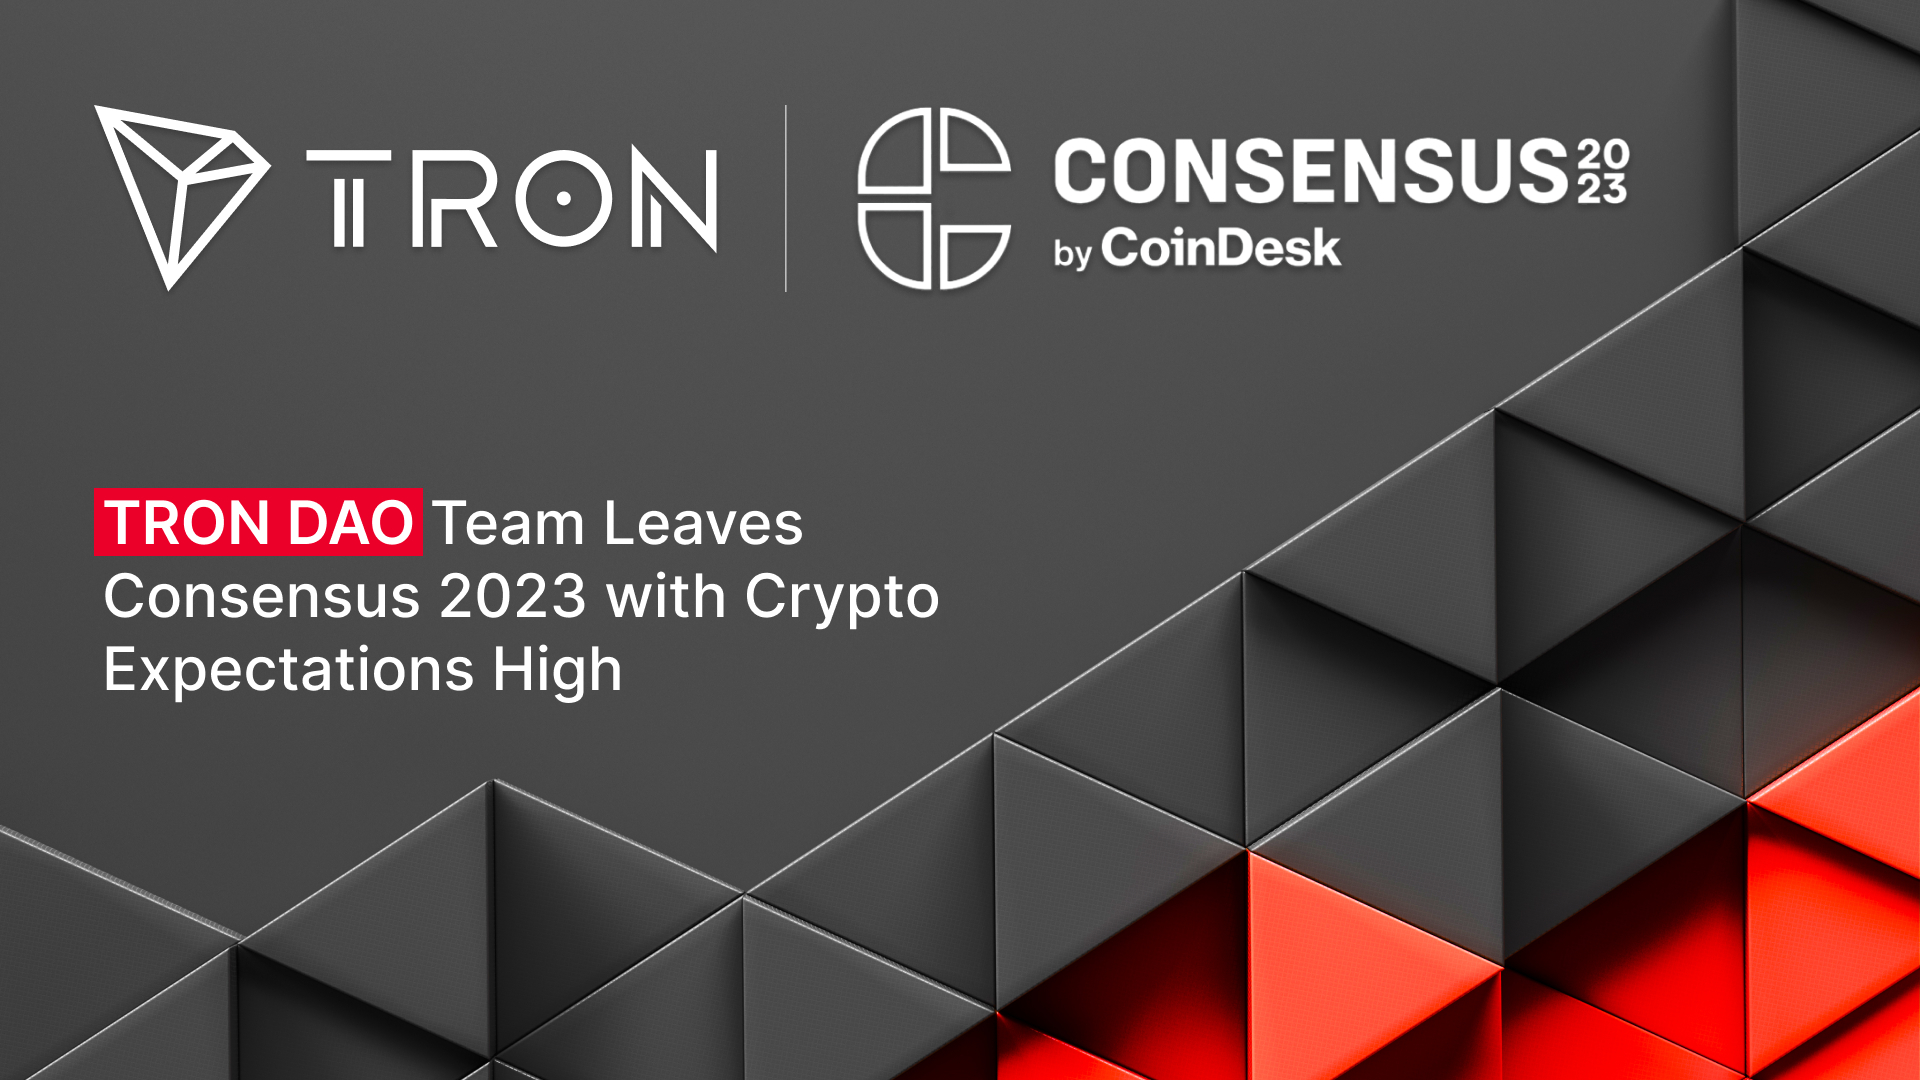 TRON DAO Team Leaves Consensus 2023 with Crypto Expectations High